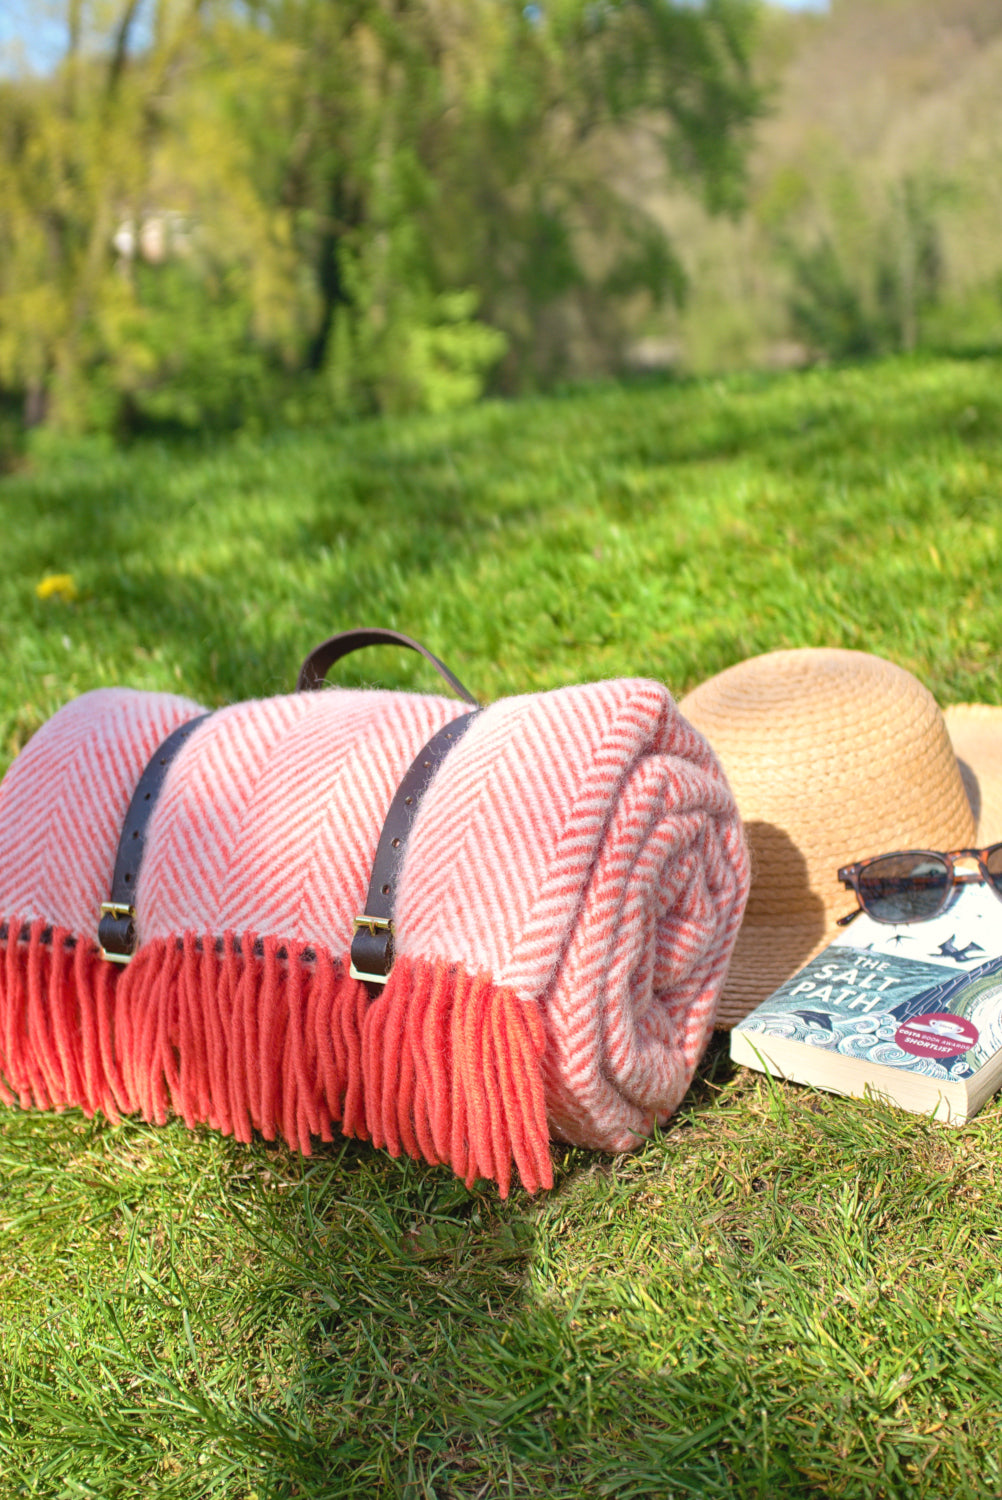 Pink wool picnic rug rolled up with leather straps placed on grass alongside a hat, a book, and a pair of sunglasses.